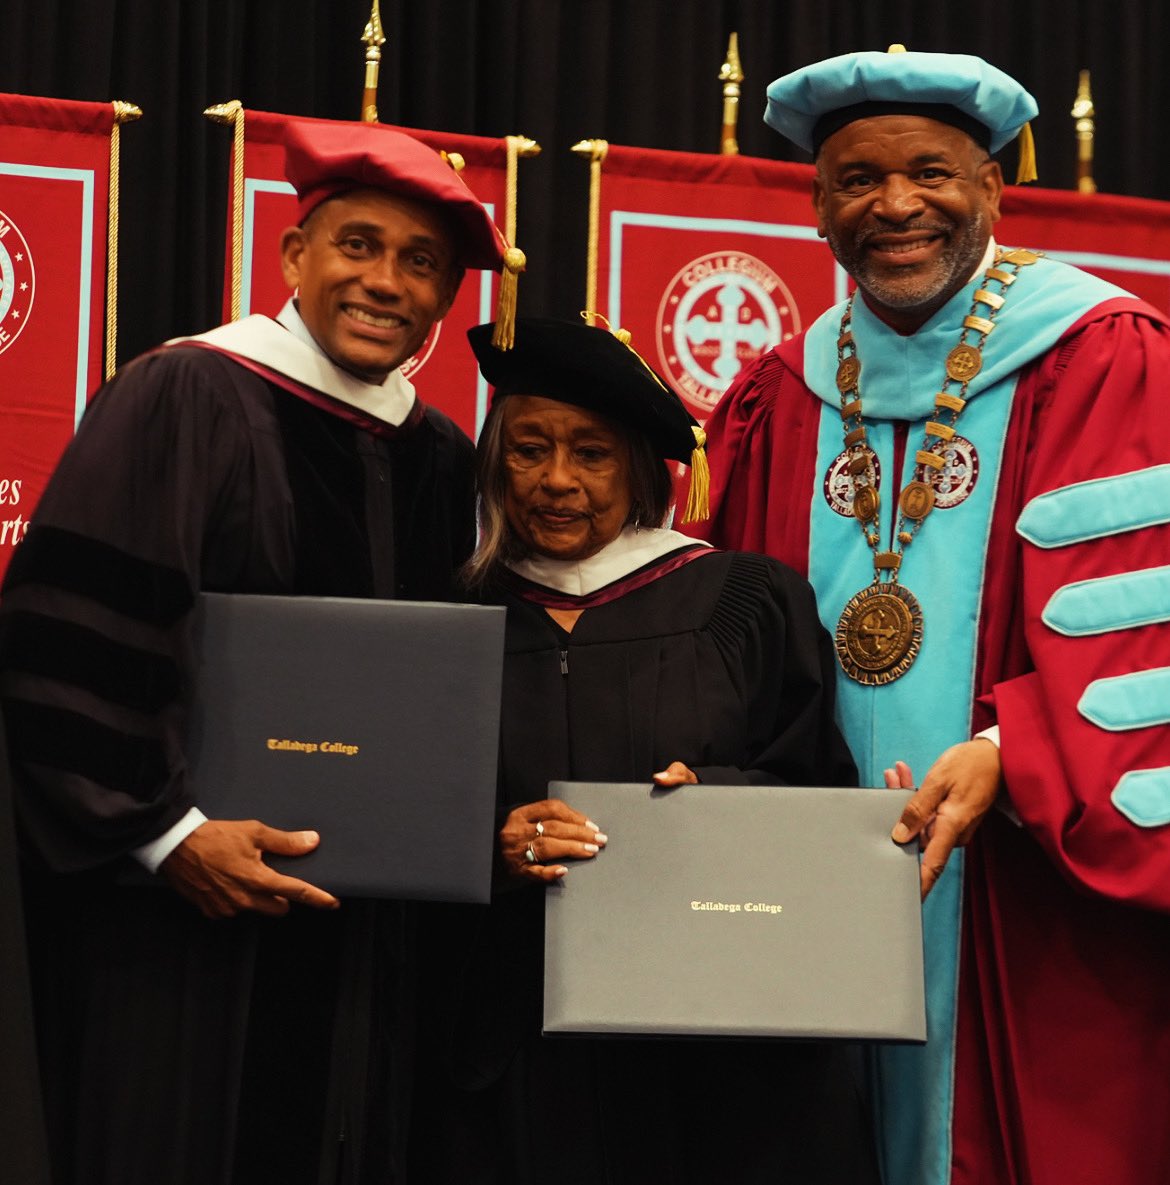 Happy Mother’s Day to all of you amazing moms! We have because you give. Thank you. Sending love, light and blessings. Last week, as Mother’s Day approached, I had the incredible honor of receiving an honorary doctorate along with my mother at her alma mater, Talladega College.